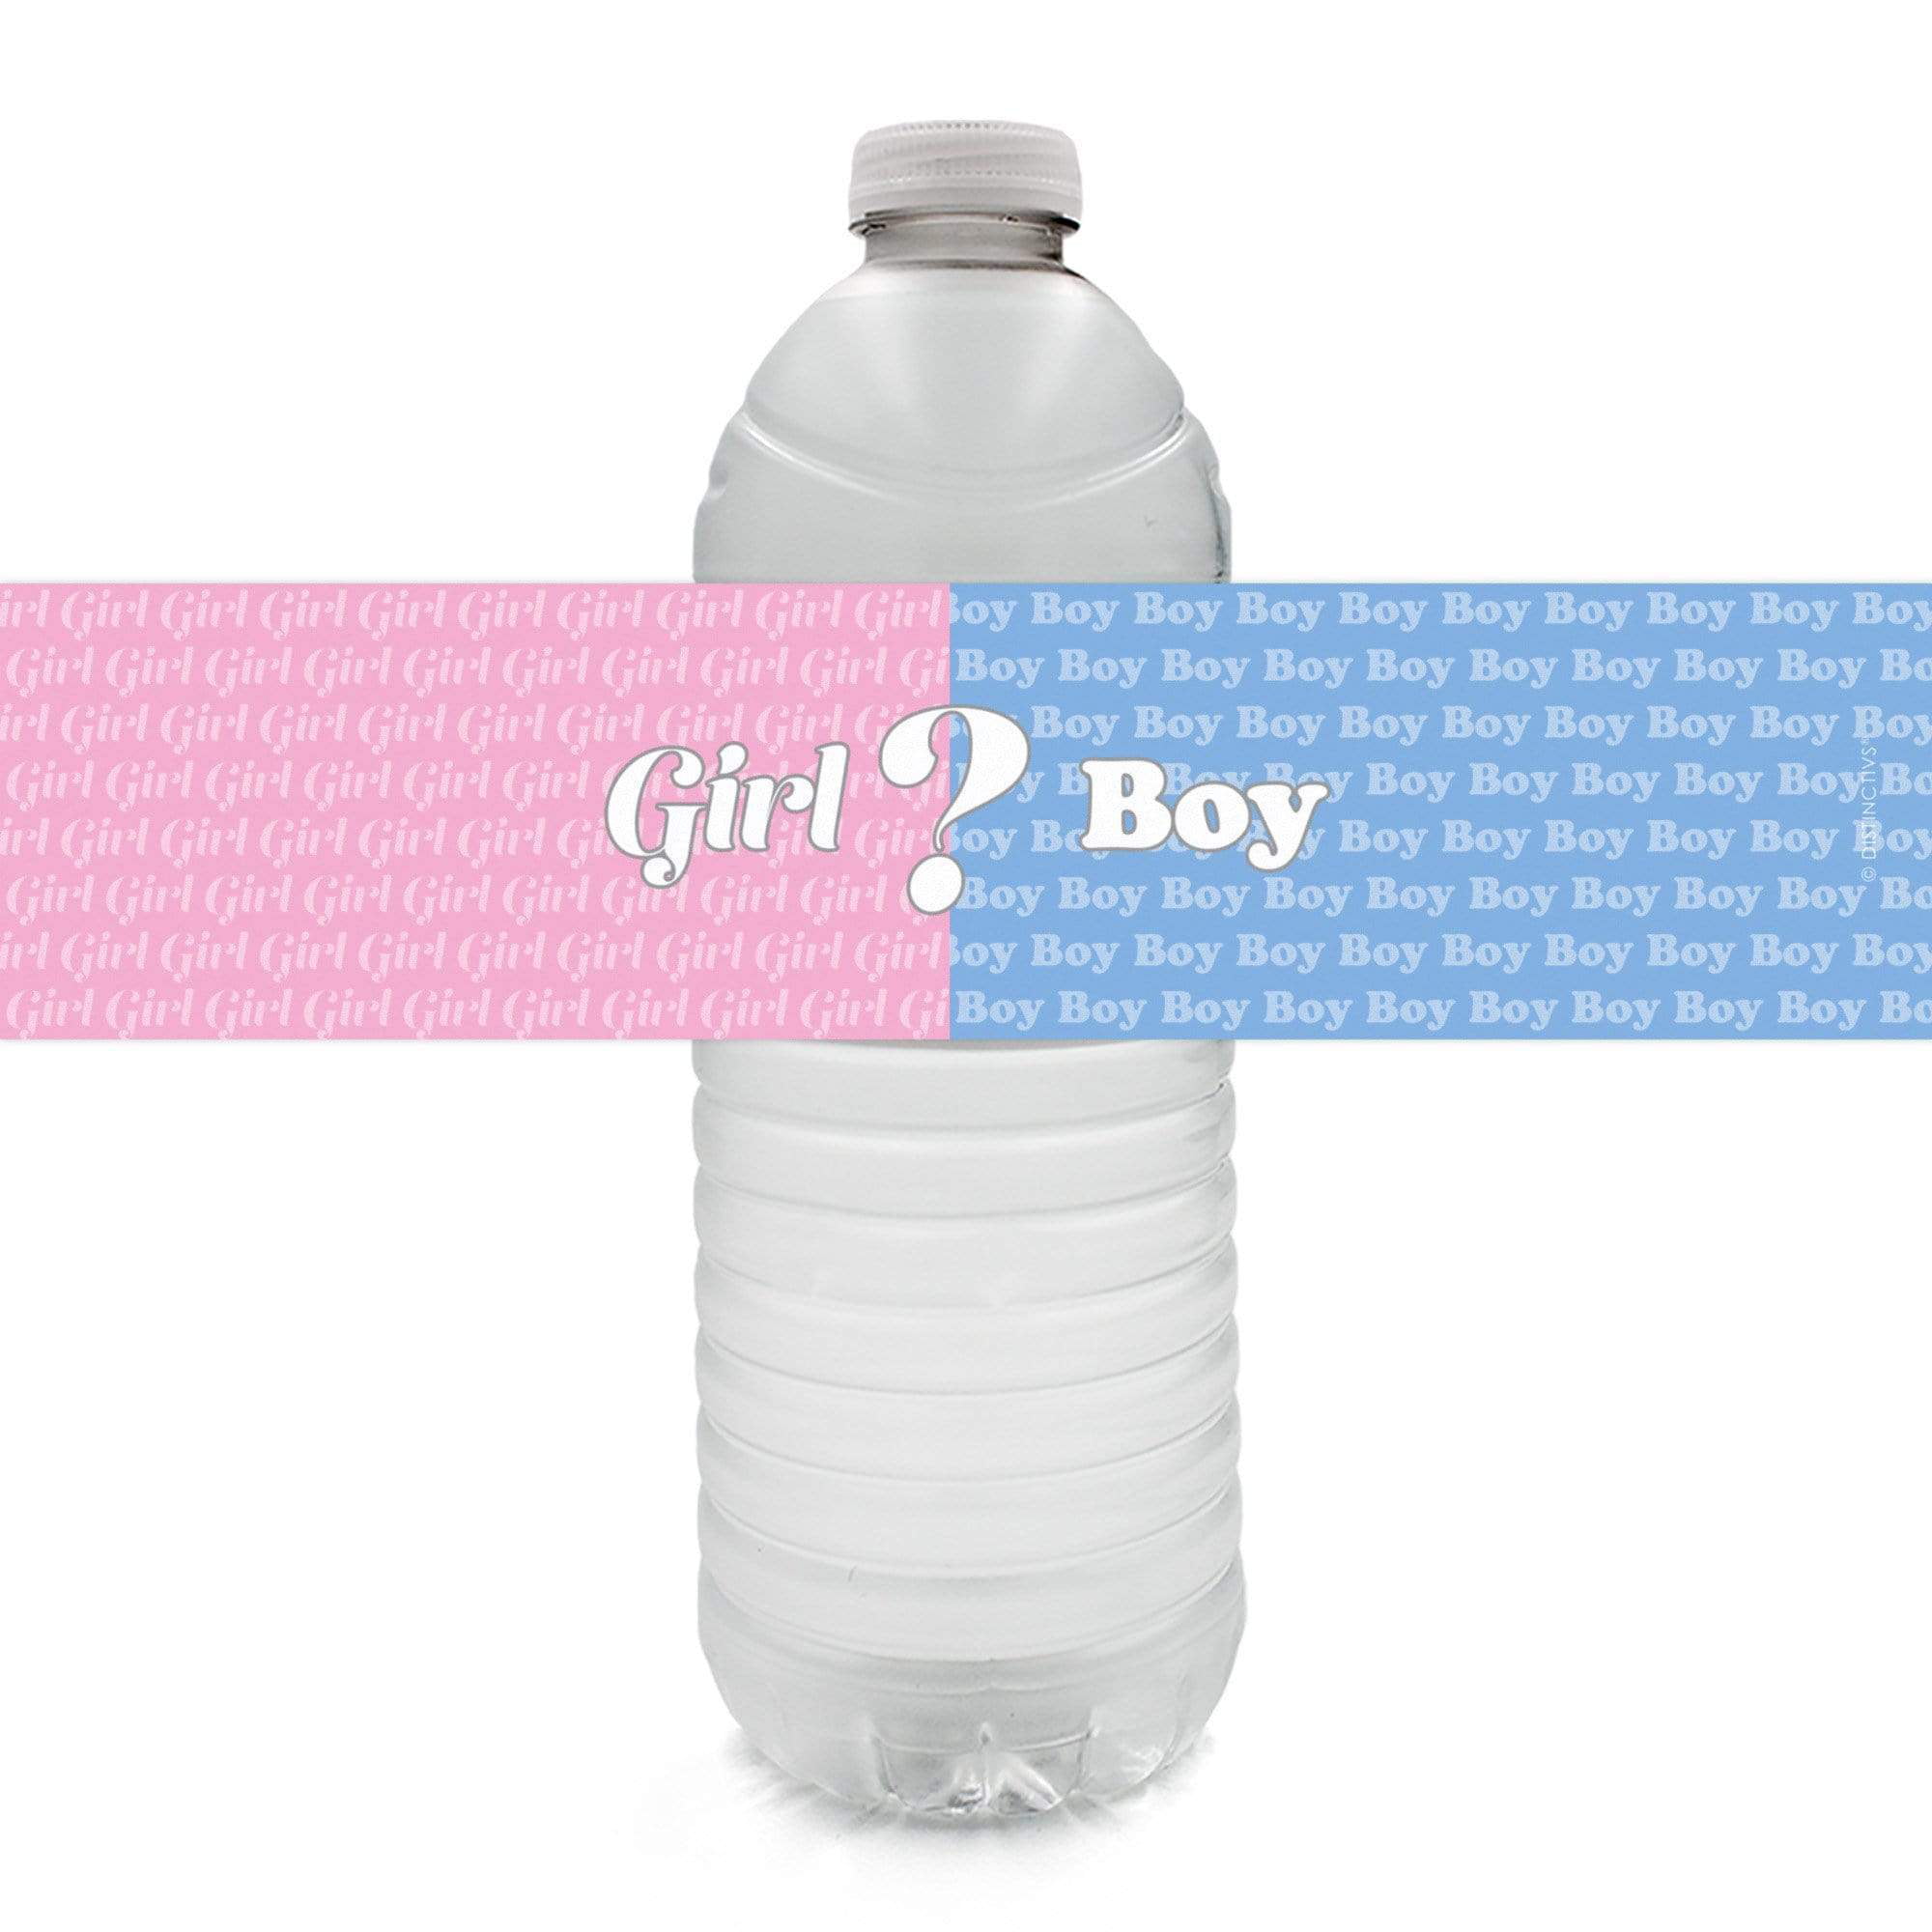 Details about   Cute Water Bottle Gift Sticker Label Baby Shower Decor Gender Reveal Party Favor